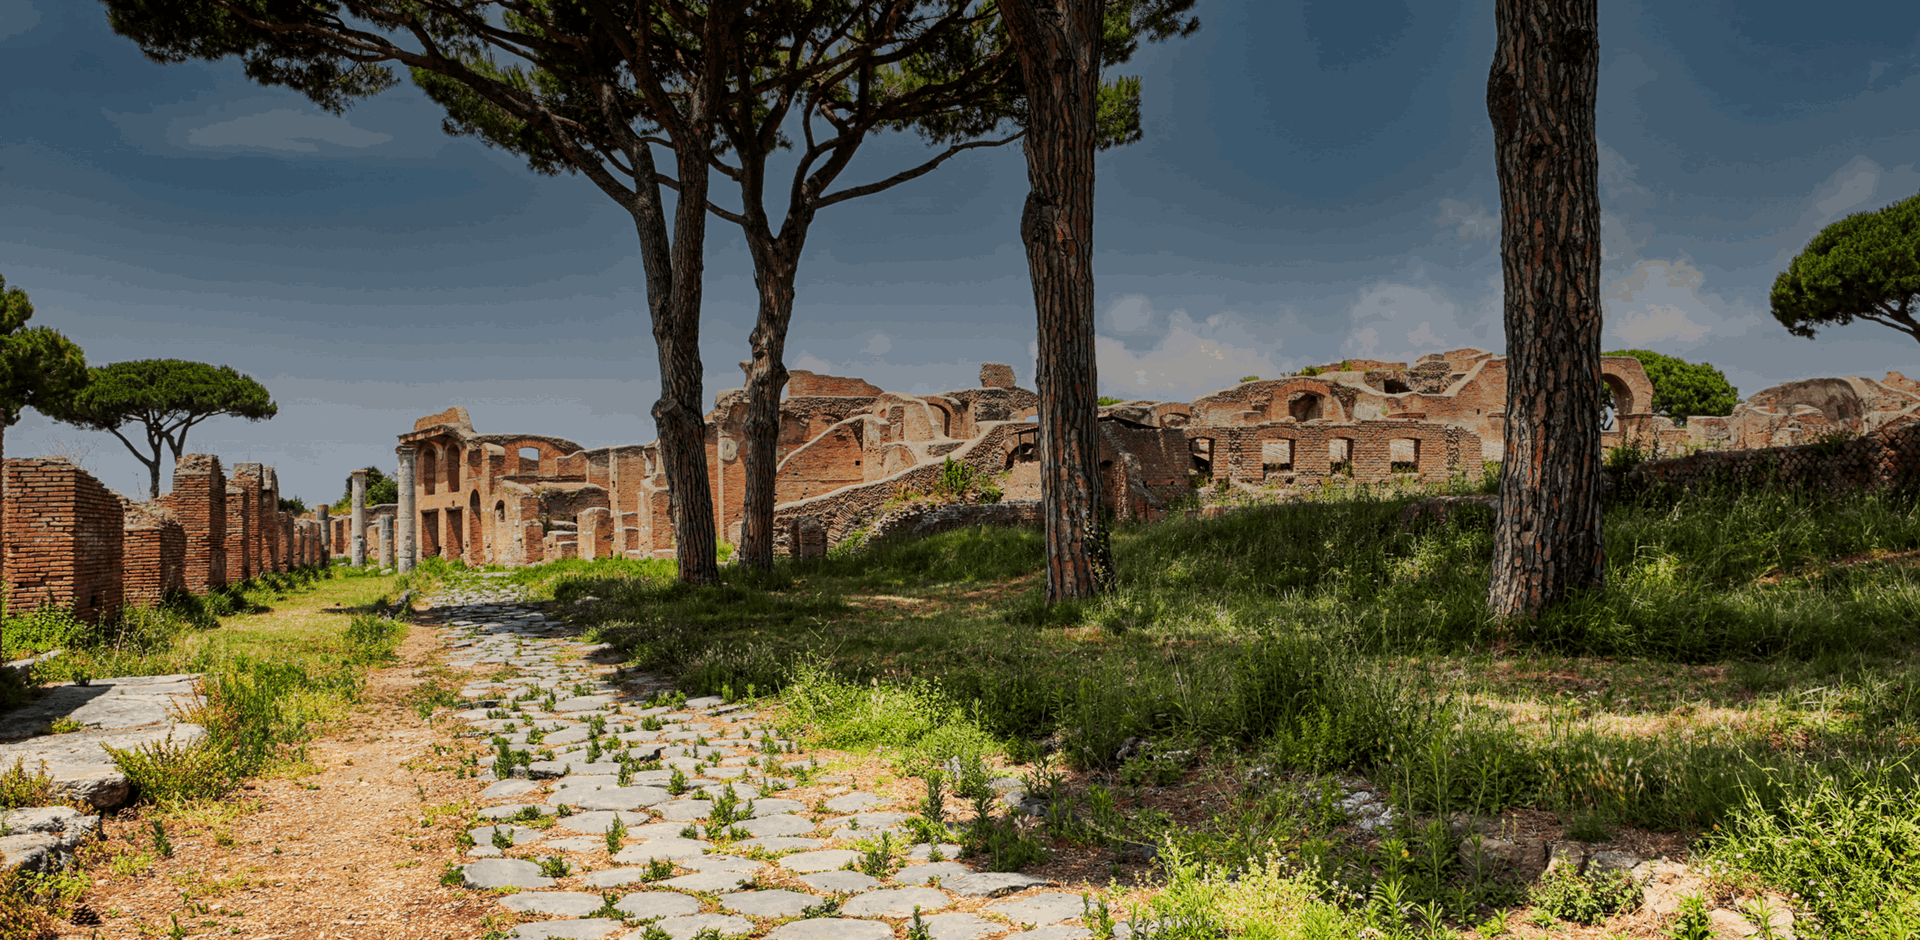 Archaeological Roman cobble street with tall trees and ruins in Ancient Ostia in Italian Ostia Antica, Rome, Italy